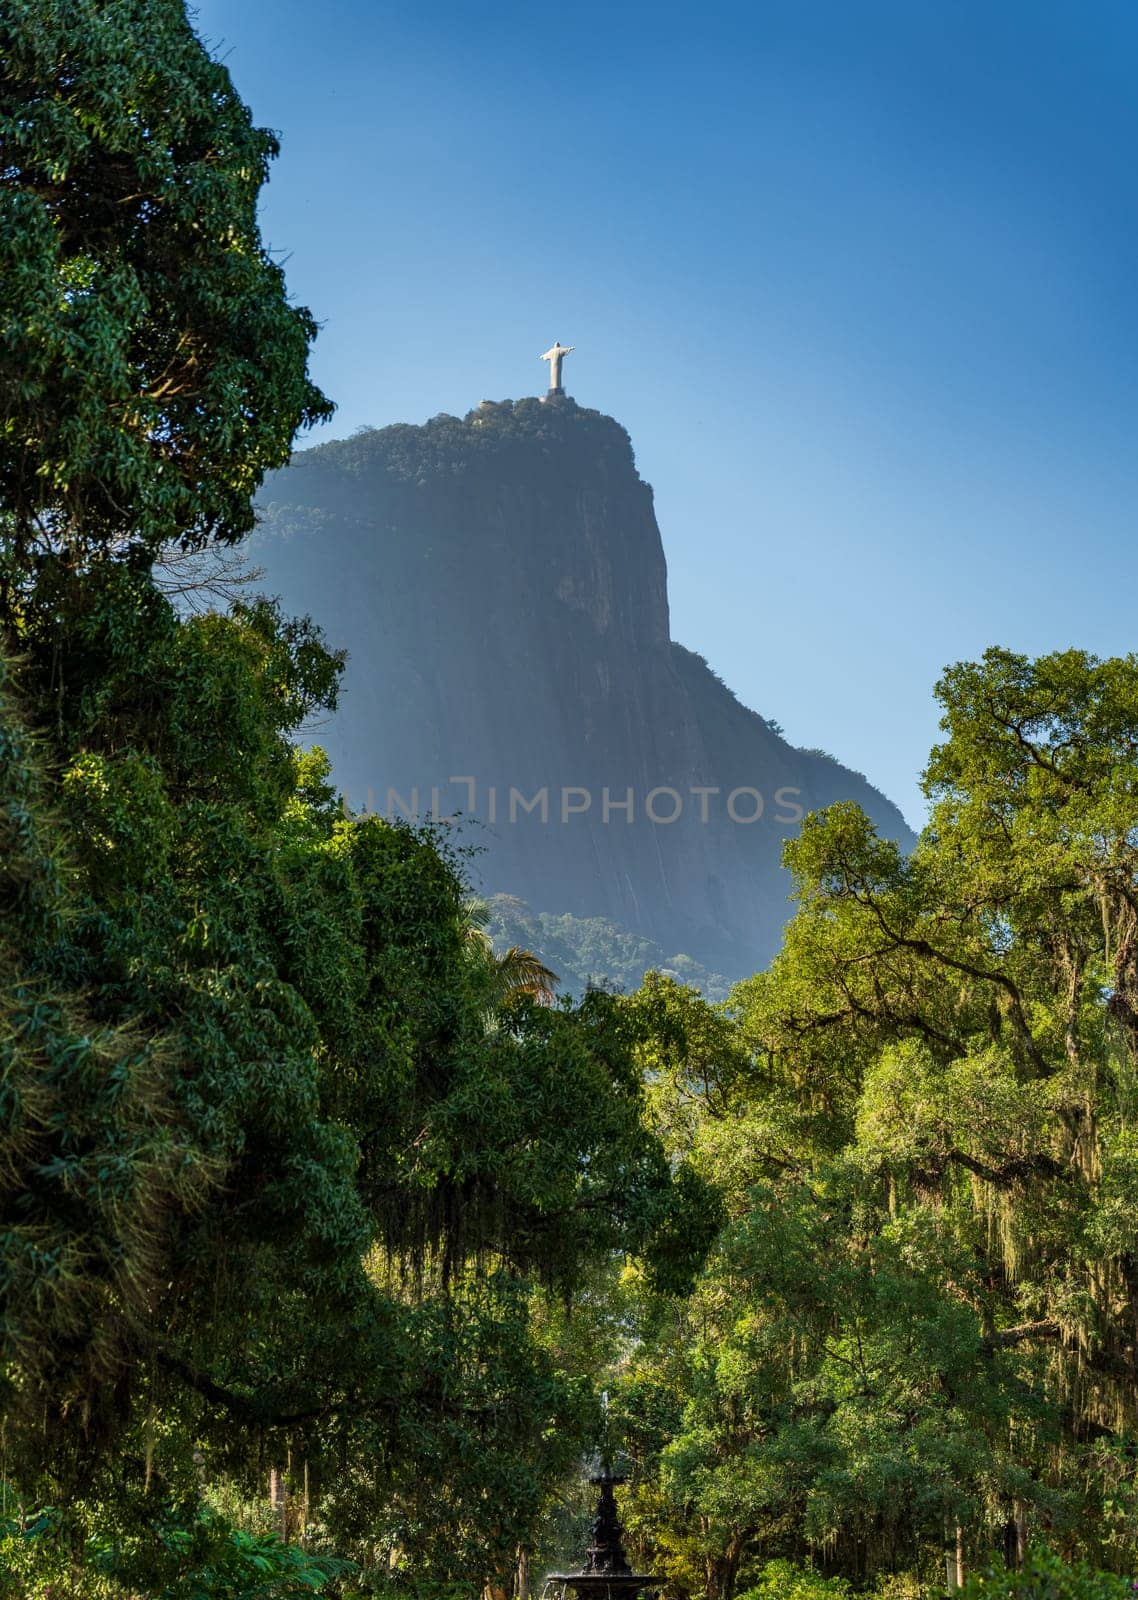 Iconic Christ the Redeemer in Rio amid greenery under blue sky.